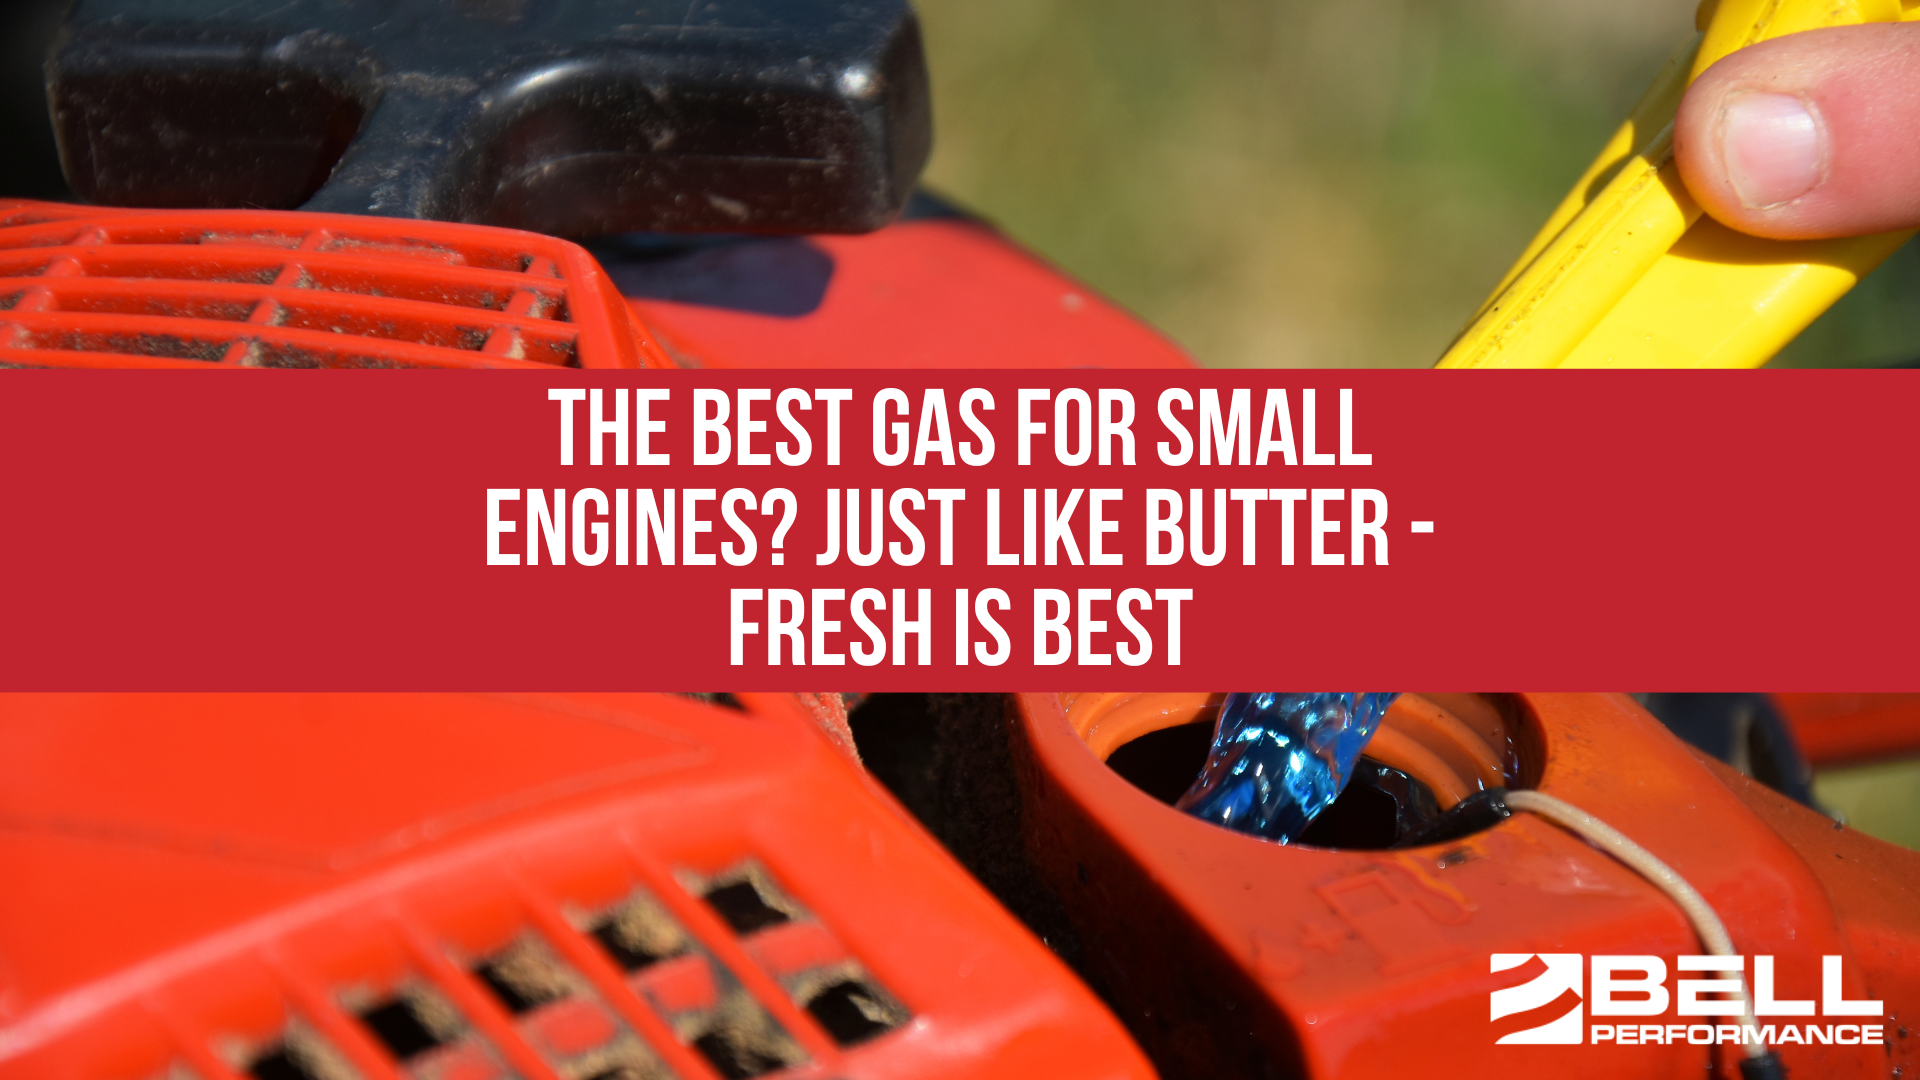 The Best Gas for Small Engines? Just like butter - Fresh Is Best